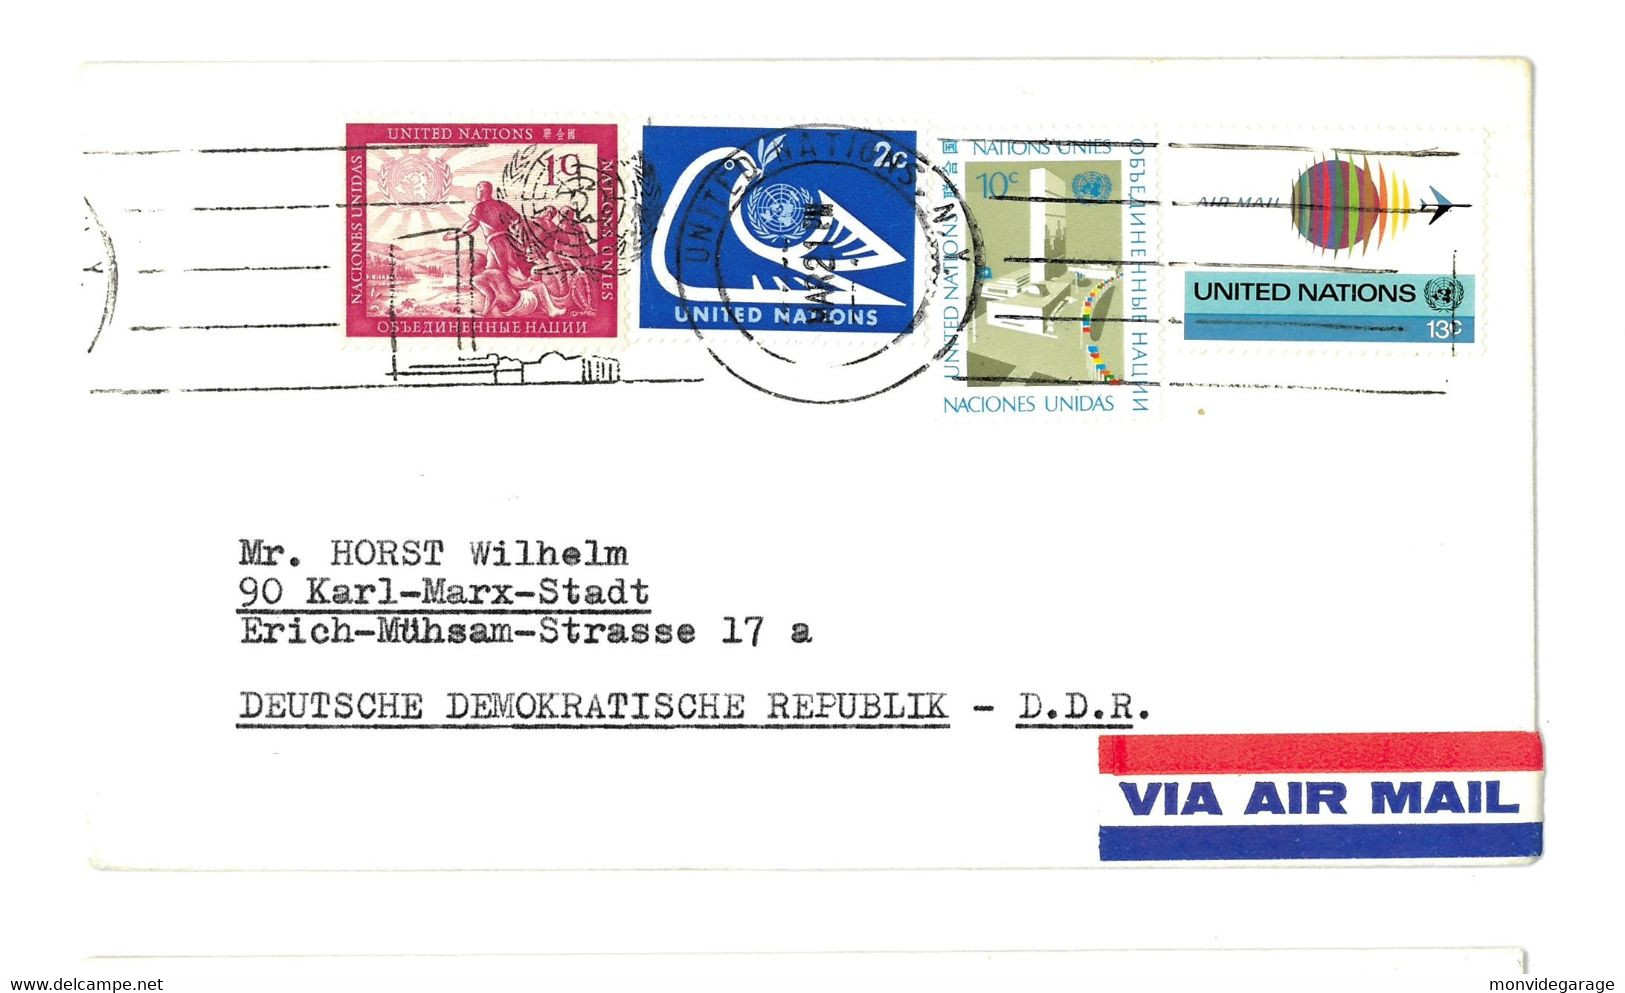 United Nations - Via Air Mail - New York 087 - Luftpost